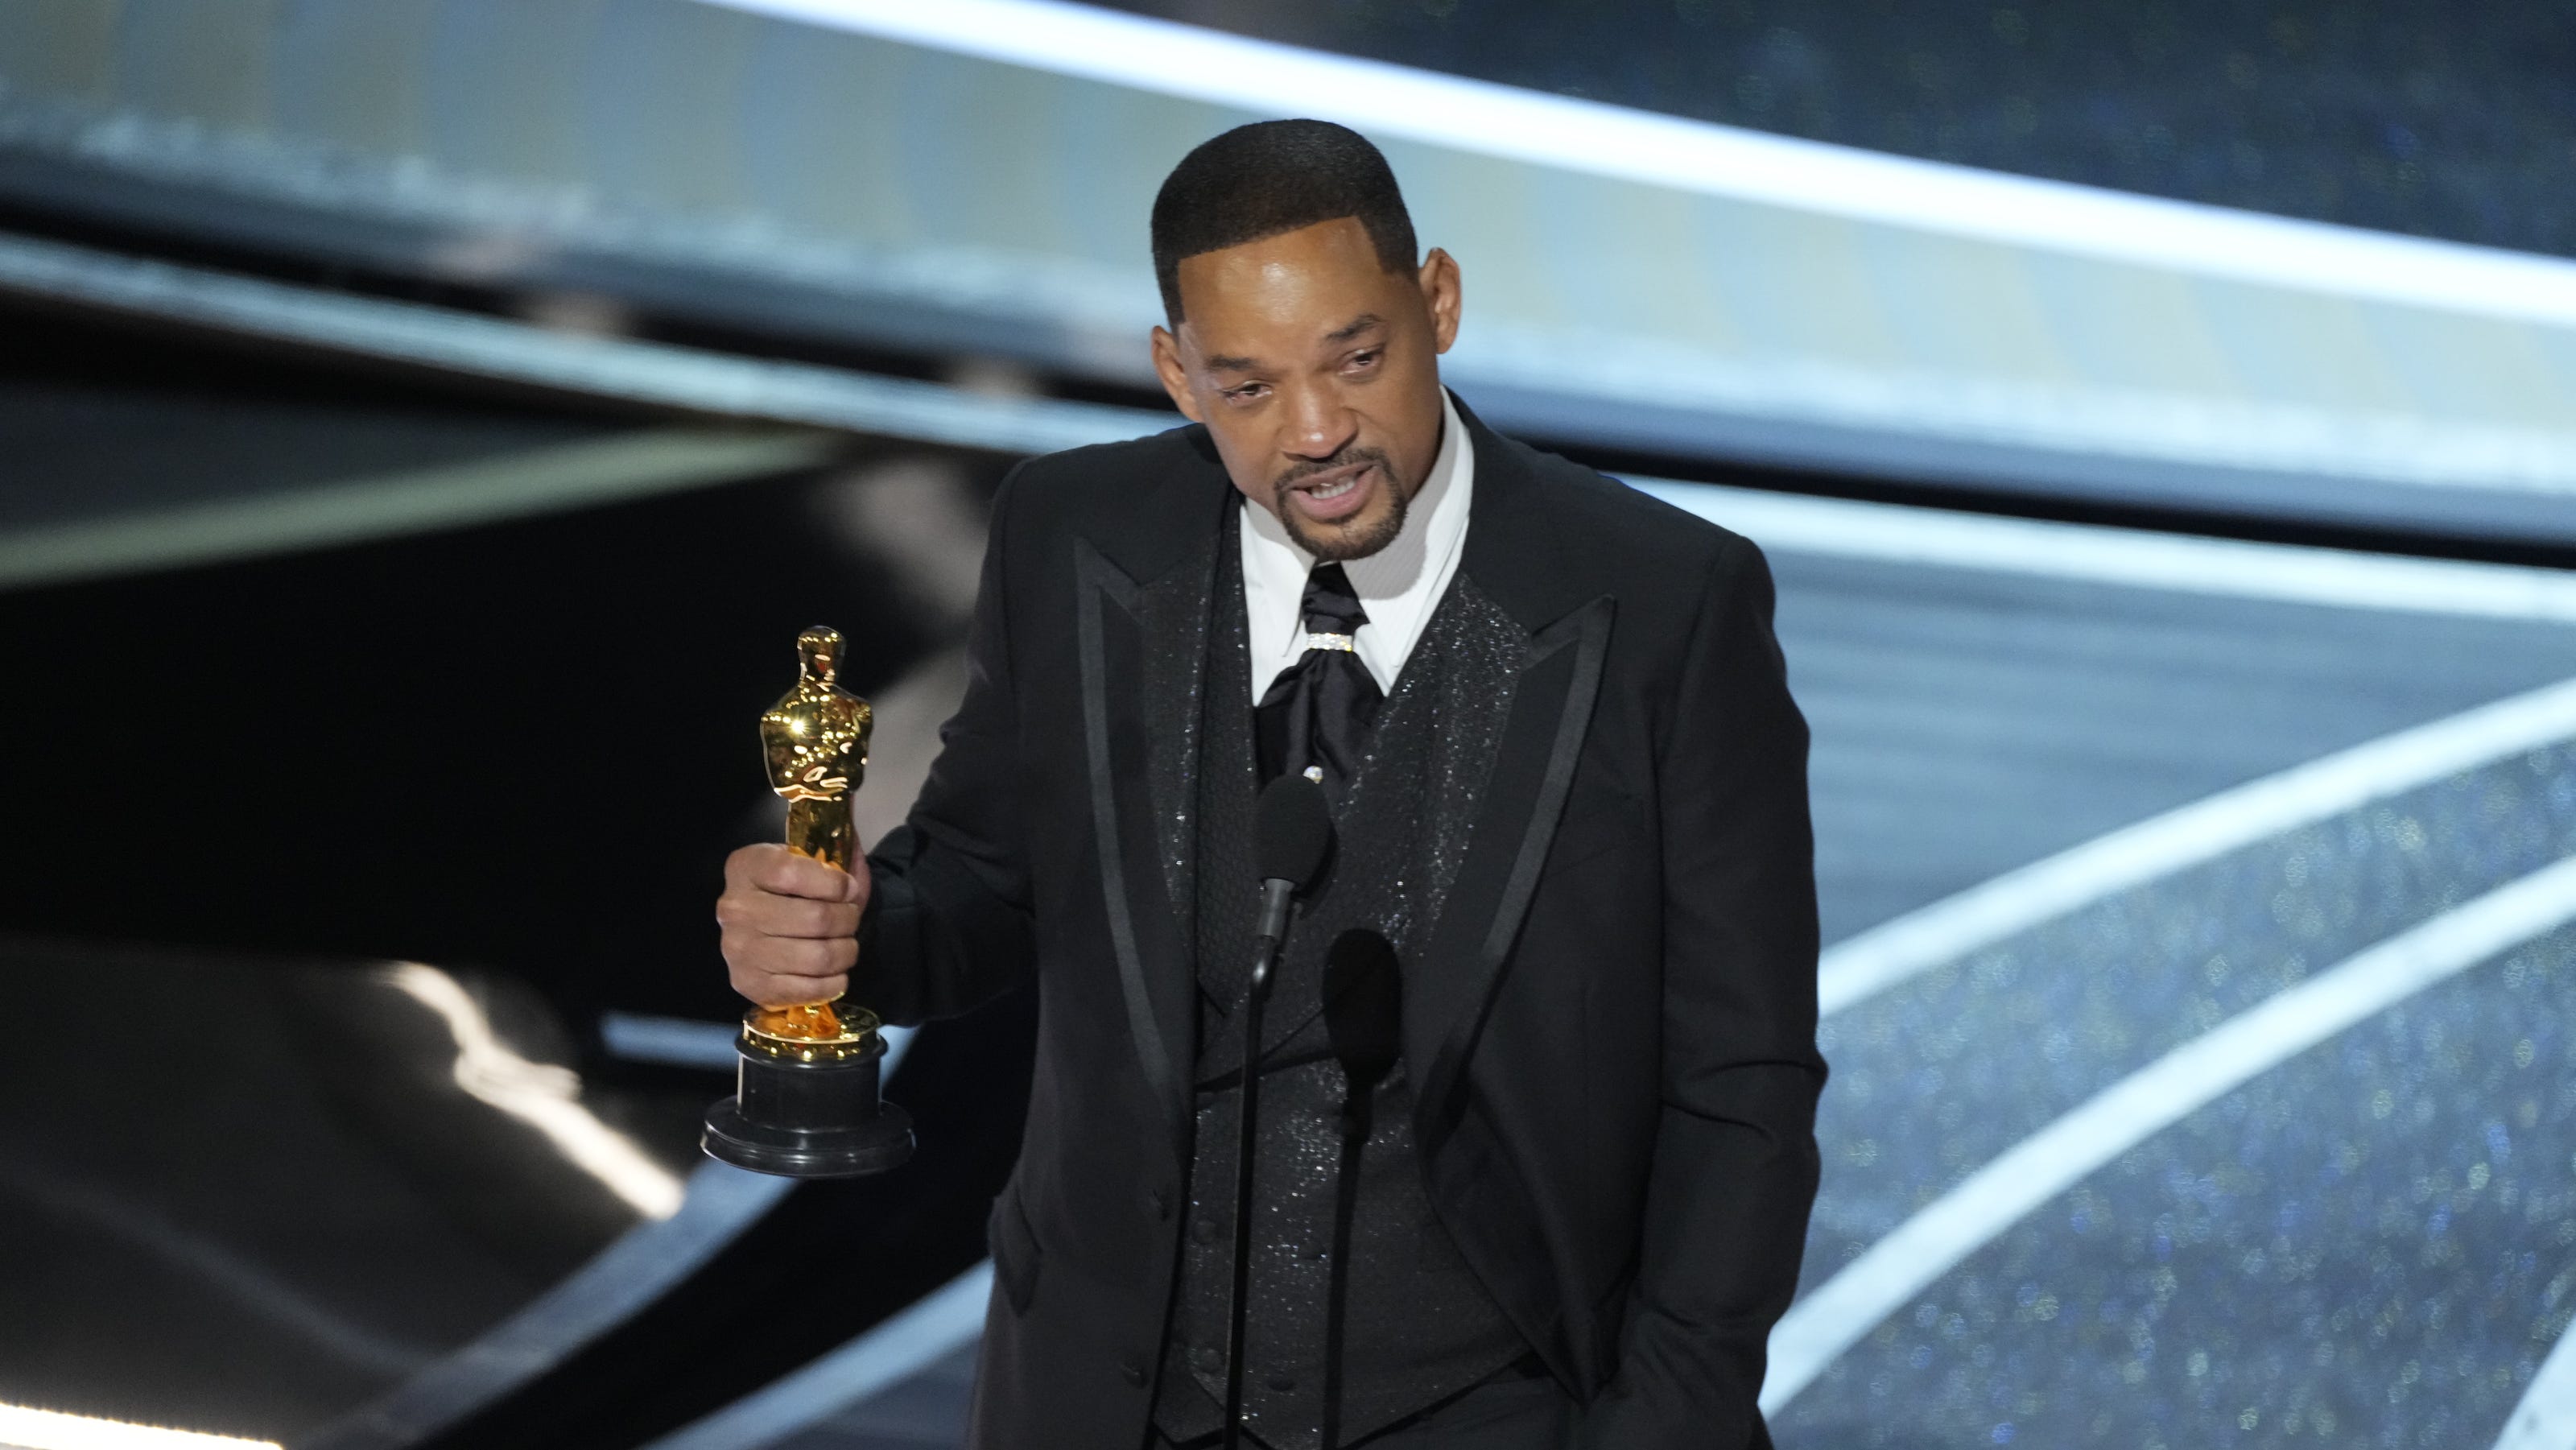 will-smith-resigns-from-the-academy-over-chris-rock-slap-at-oscars-i-am-heartbroken